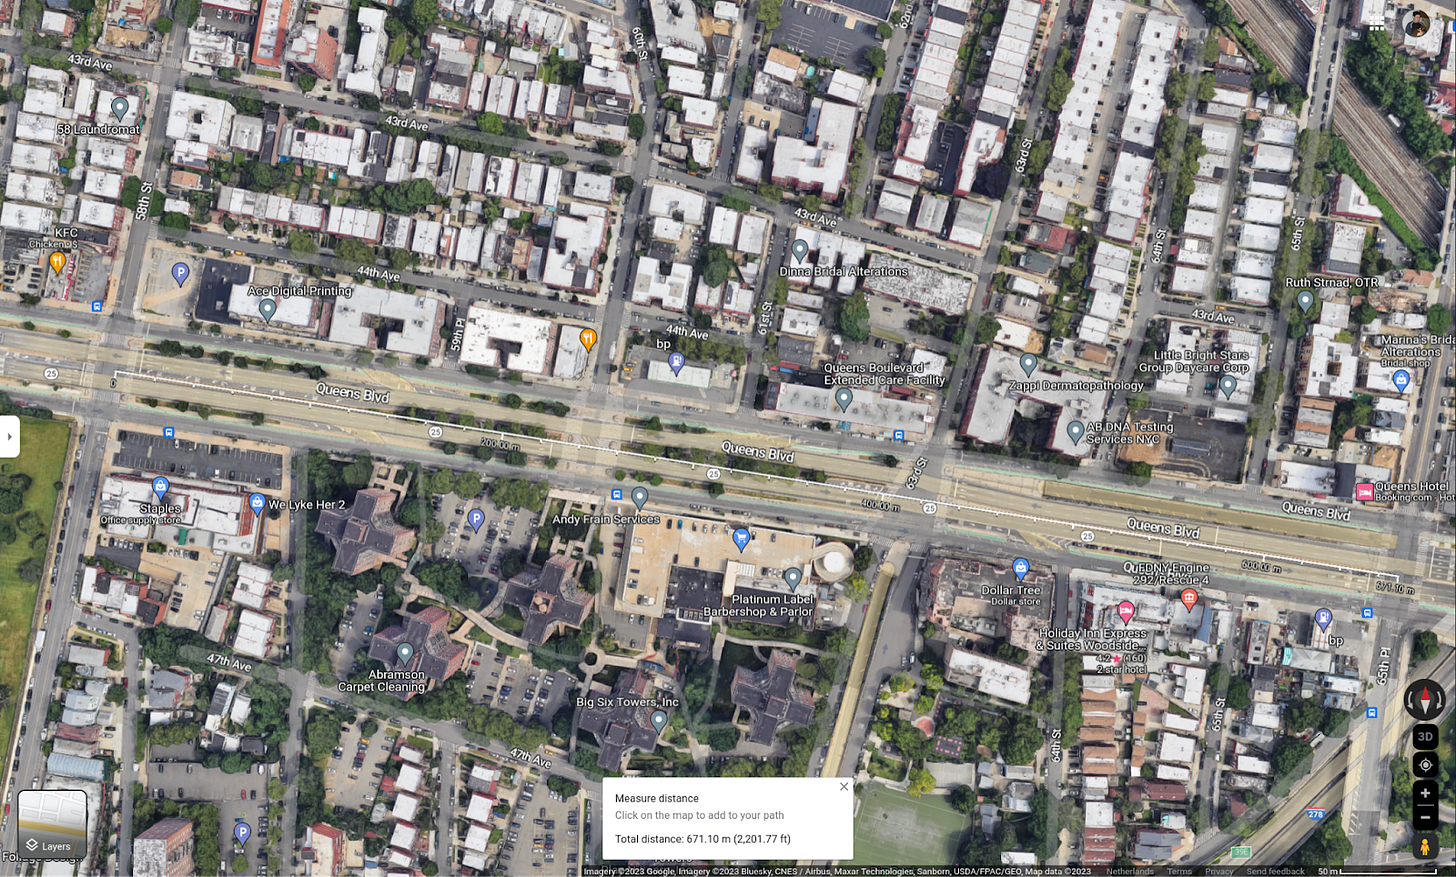 Image shows Queens Boulevard with four intersecting roads and the maps distance measuring tool reading less than 700 meters.